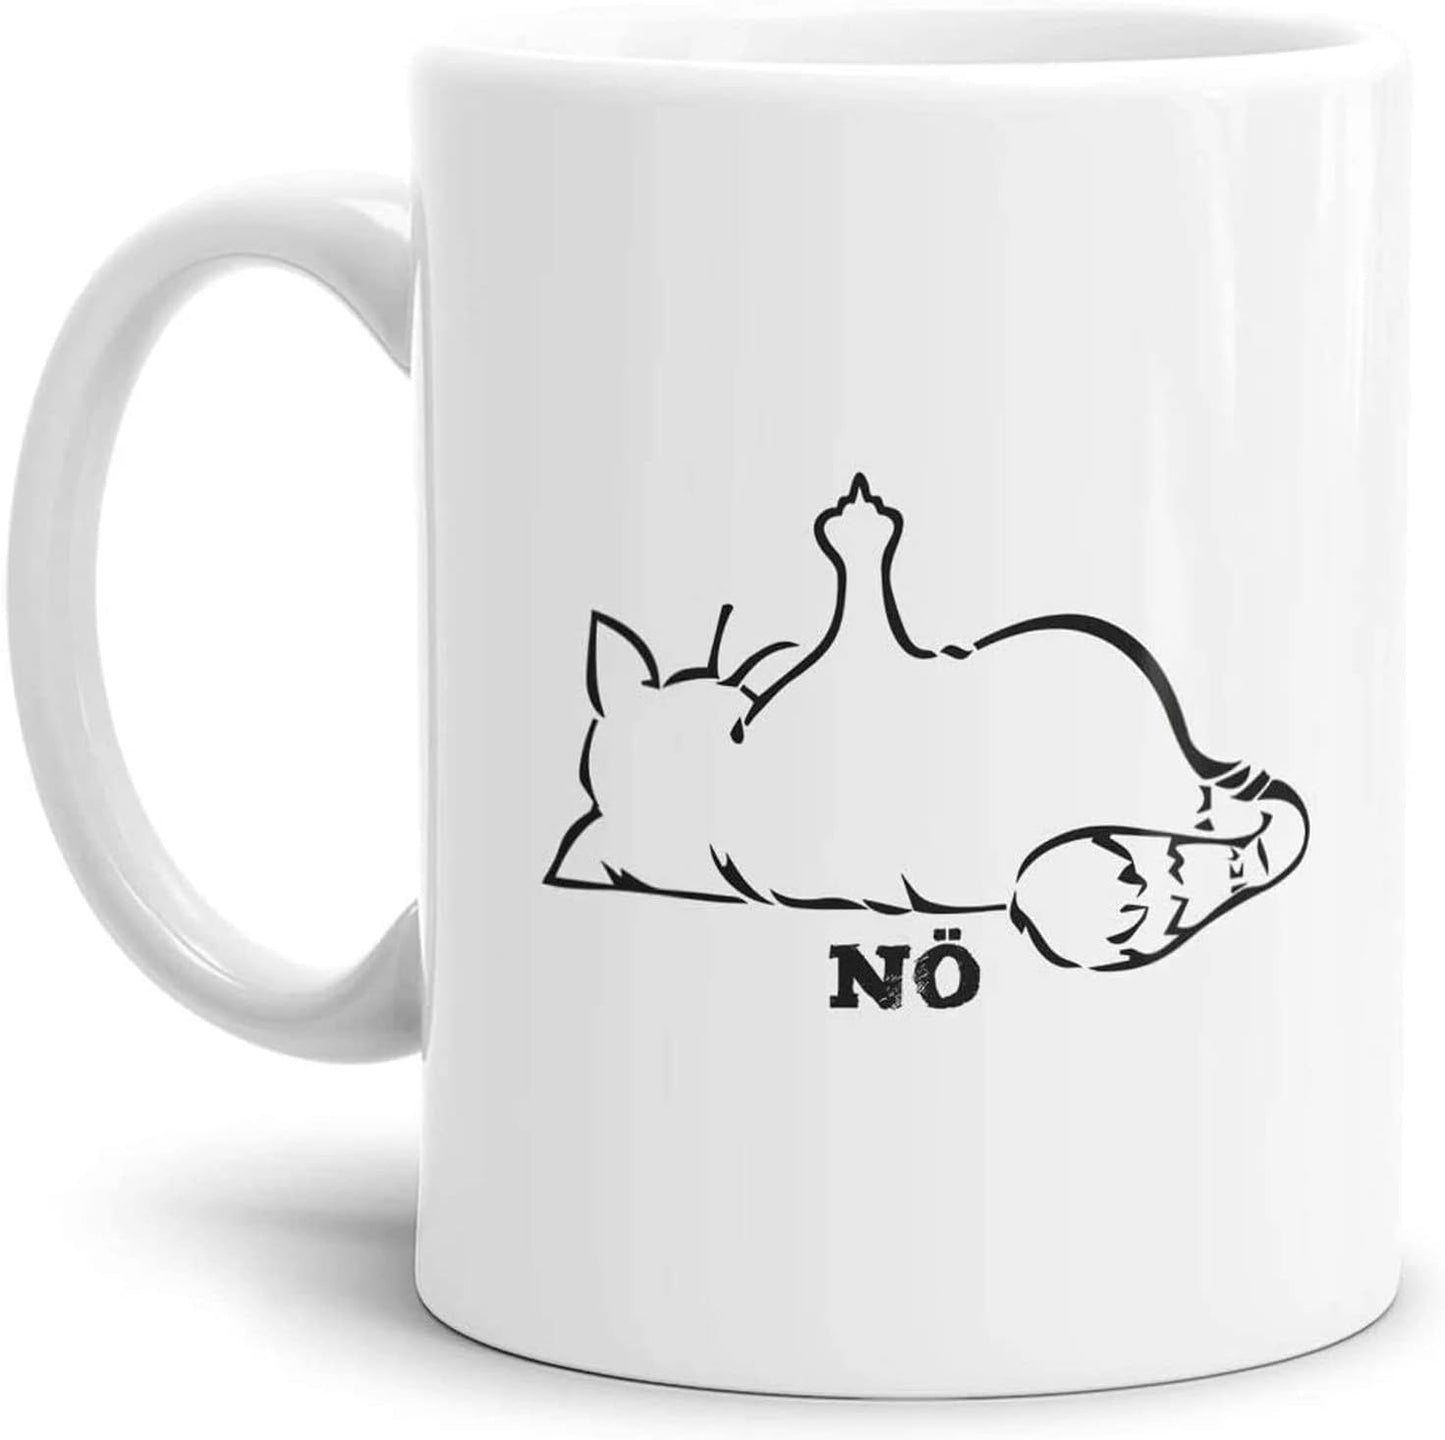 Mug-cat fuck tired fuck you funny nice gift mom dad colleagues friends ceramic for breakfast coffee or tea